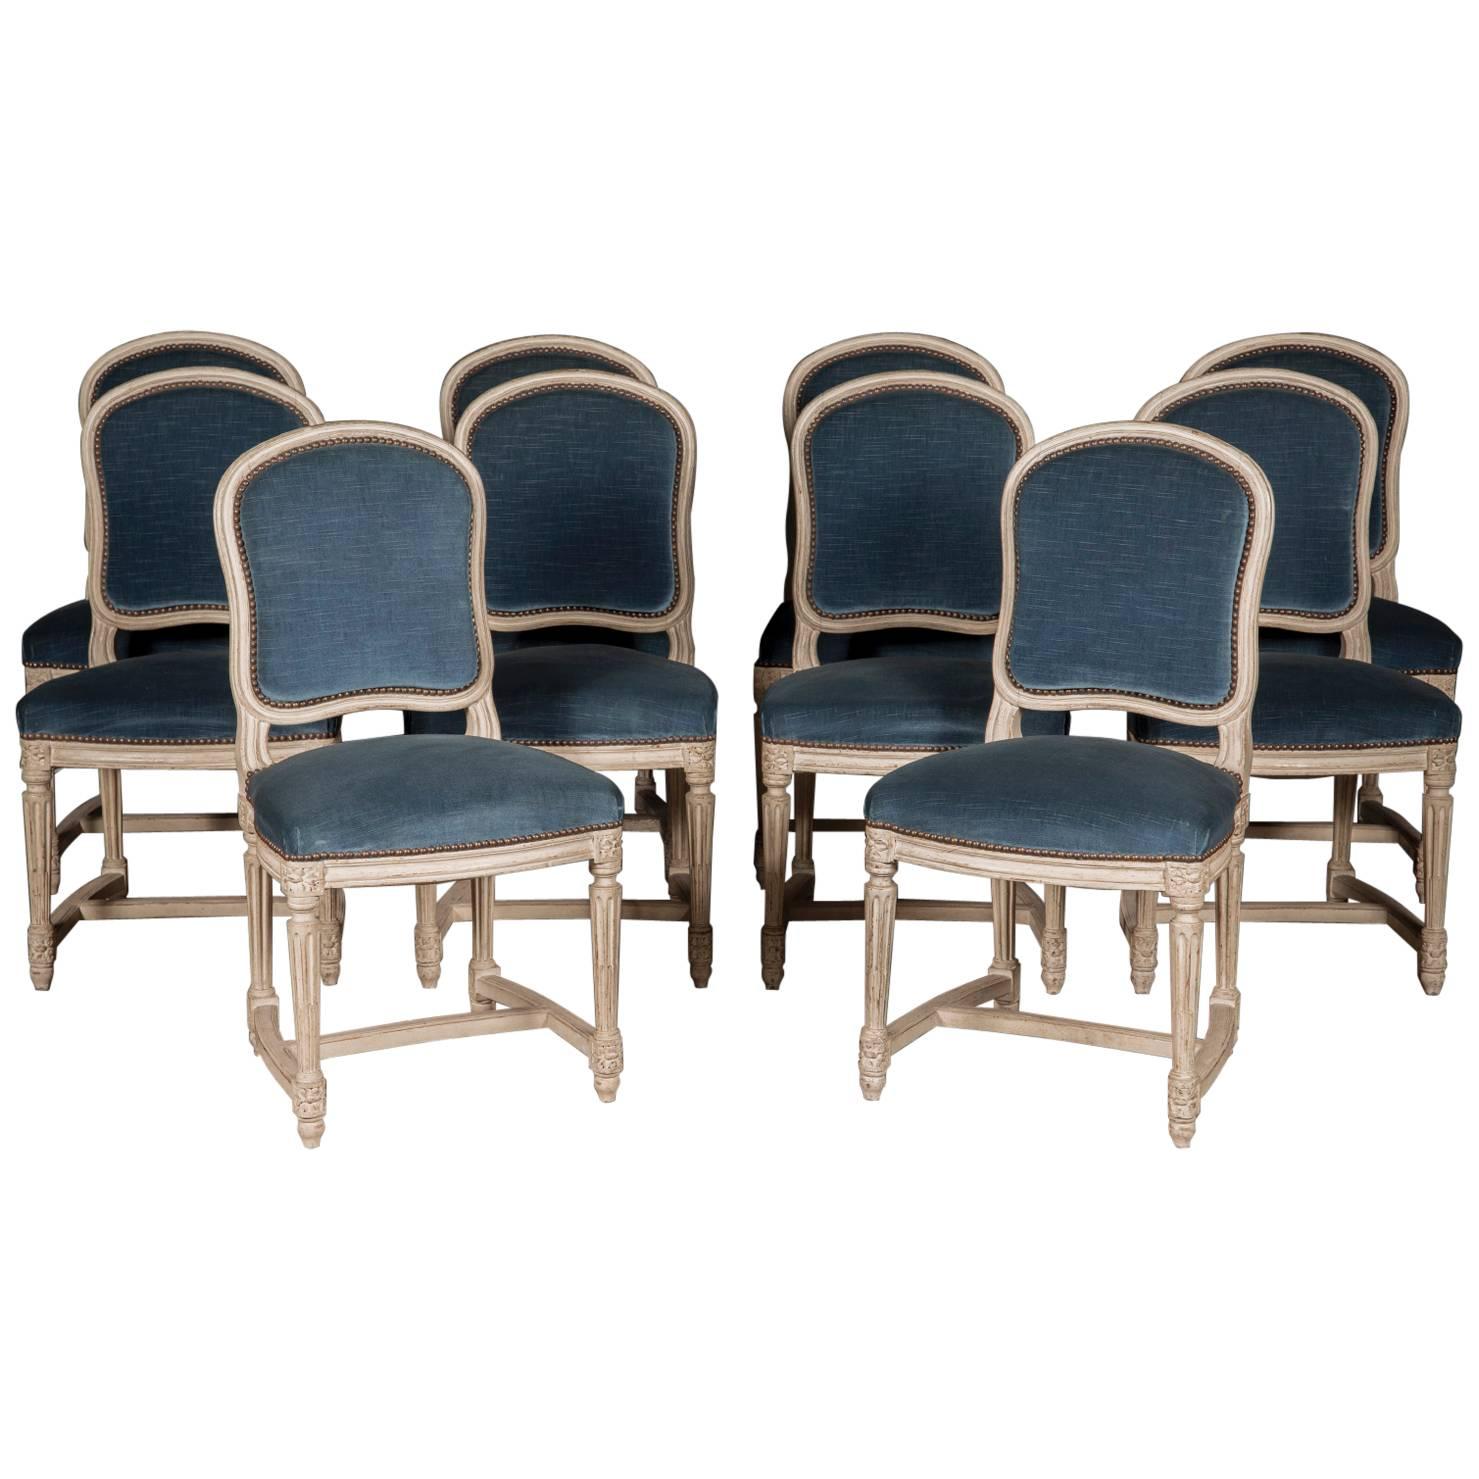 Set of Ten 19th Century Painted Chairs